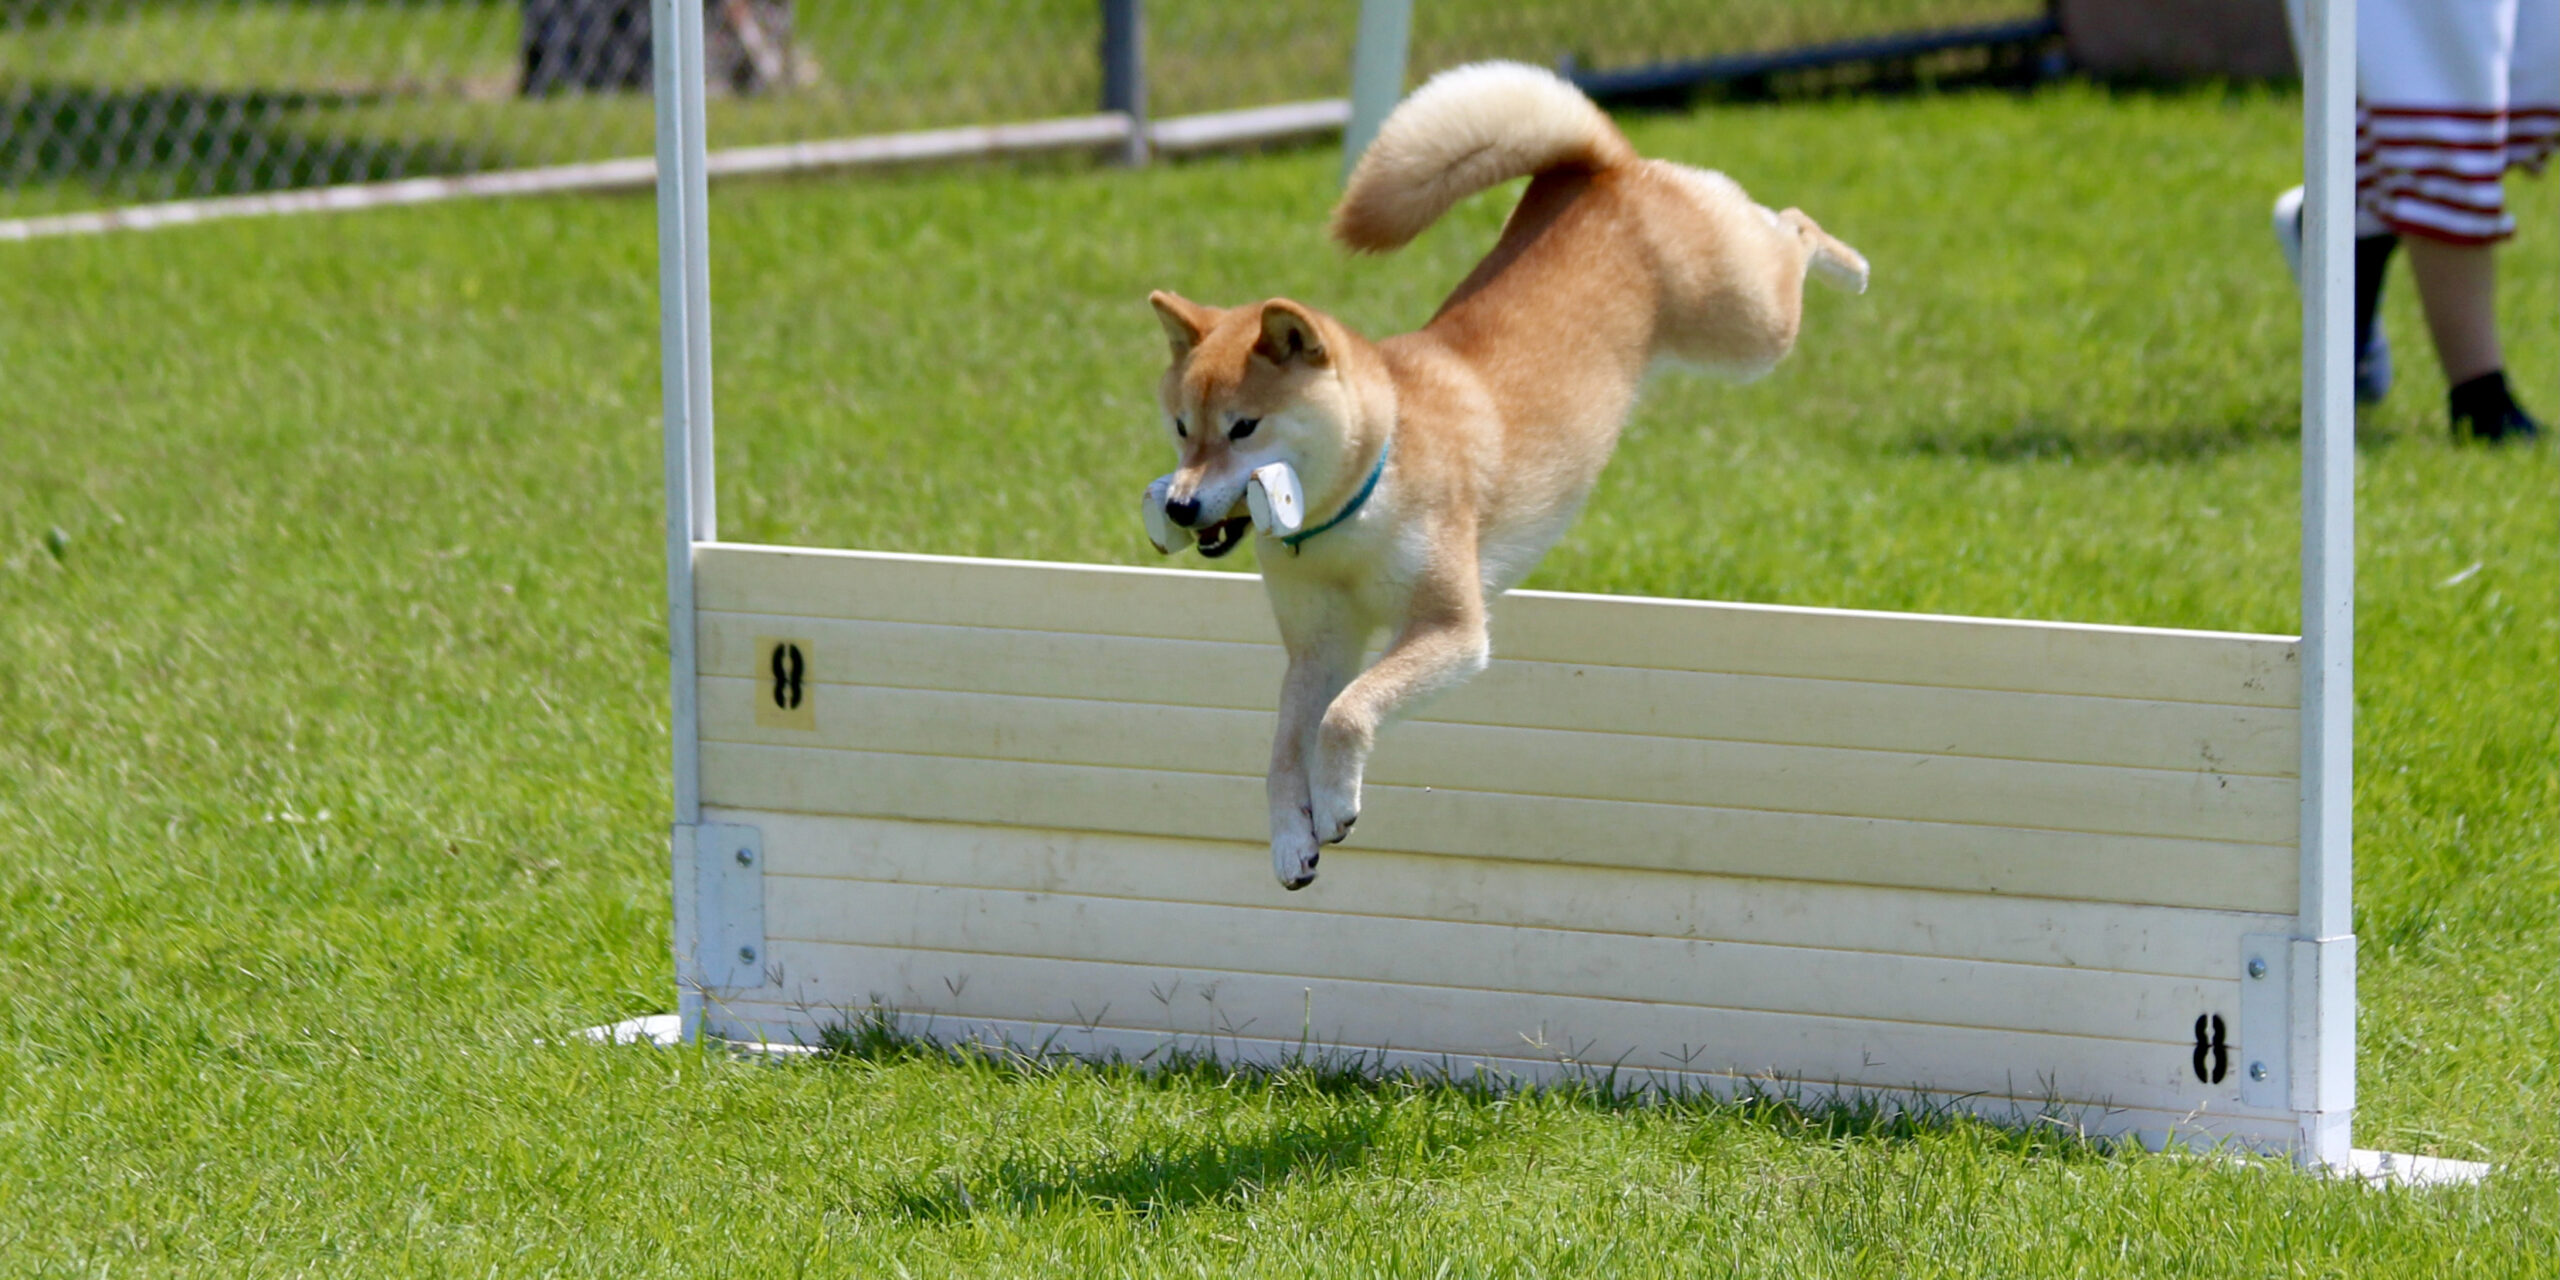 Shiba Inu jumping with dumb bell in obedience